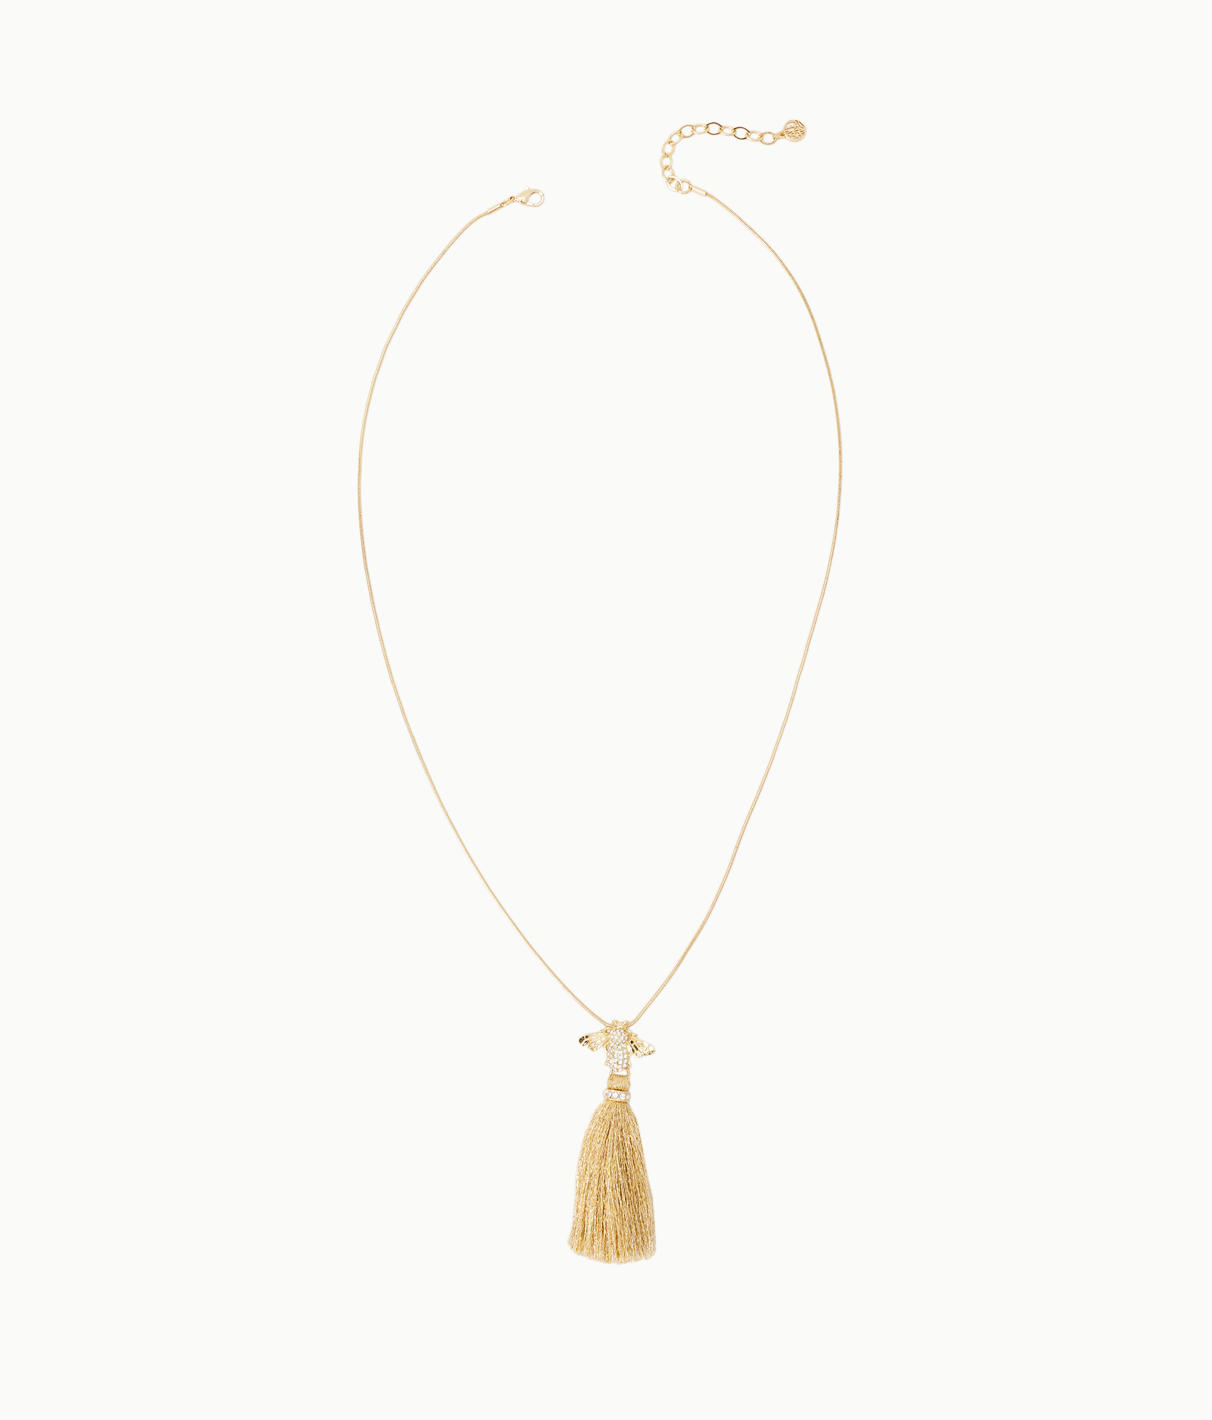 Lilly Pulitzer Bee-utiful Tassel Necklace In Gold Metallic